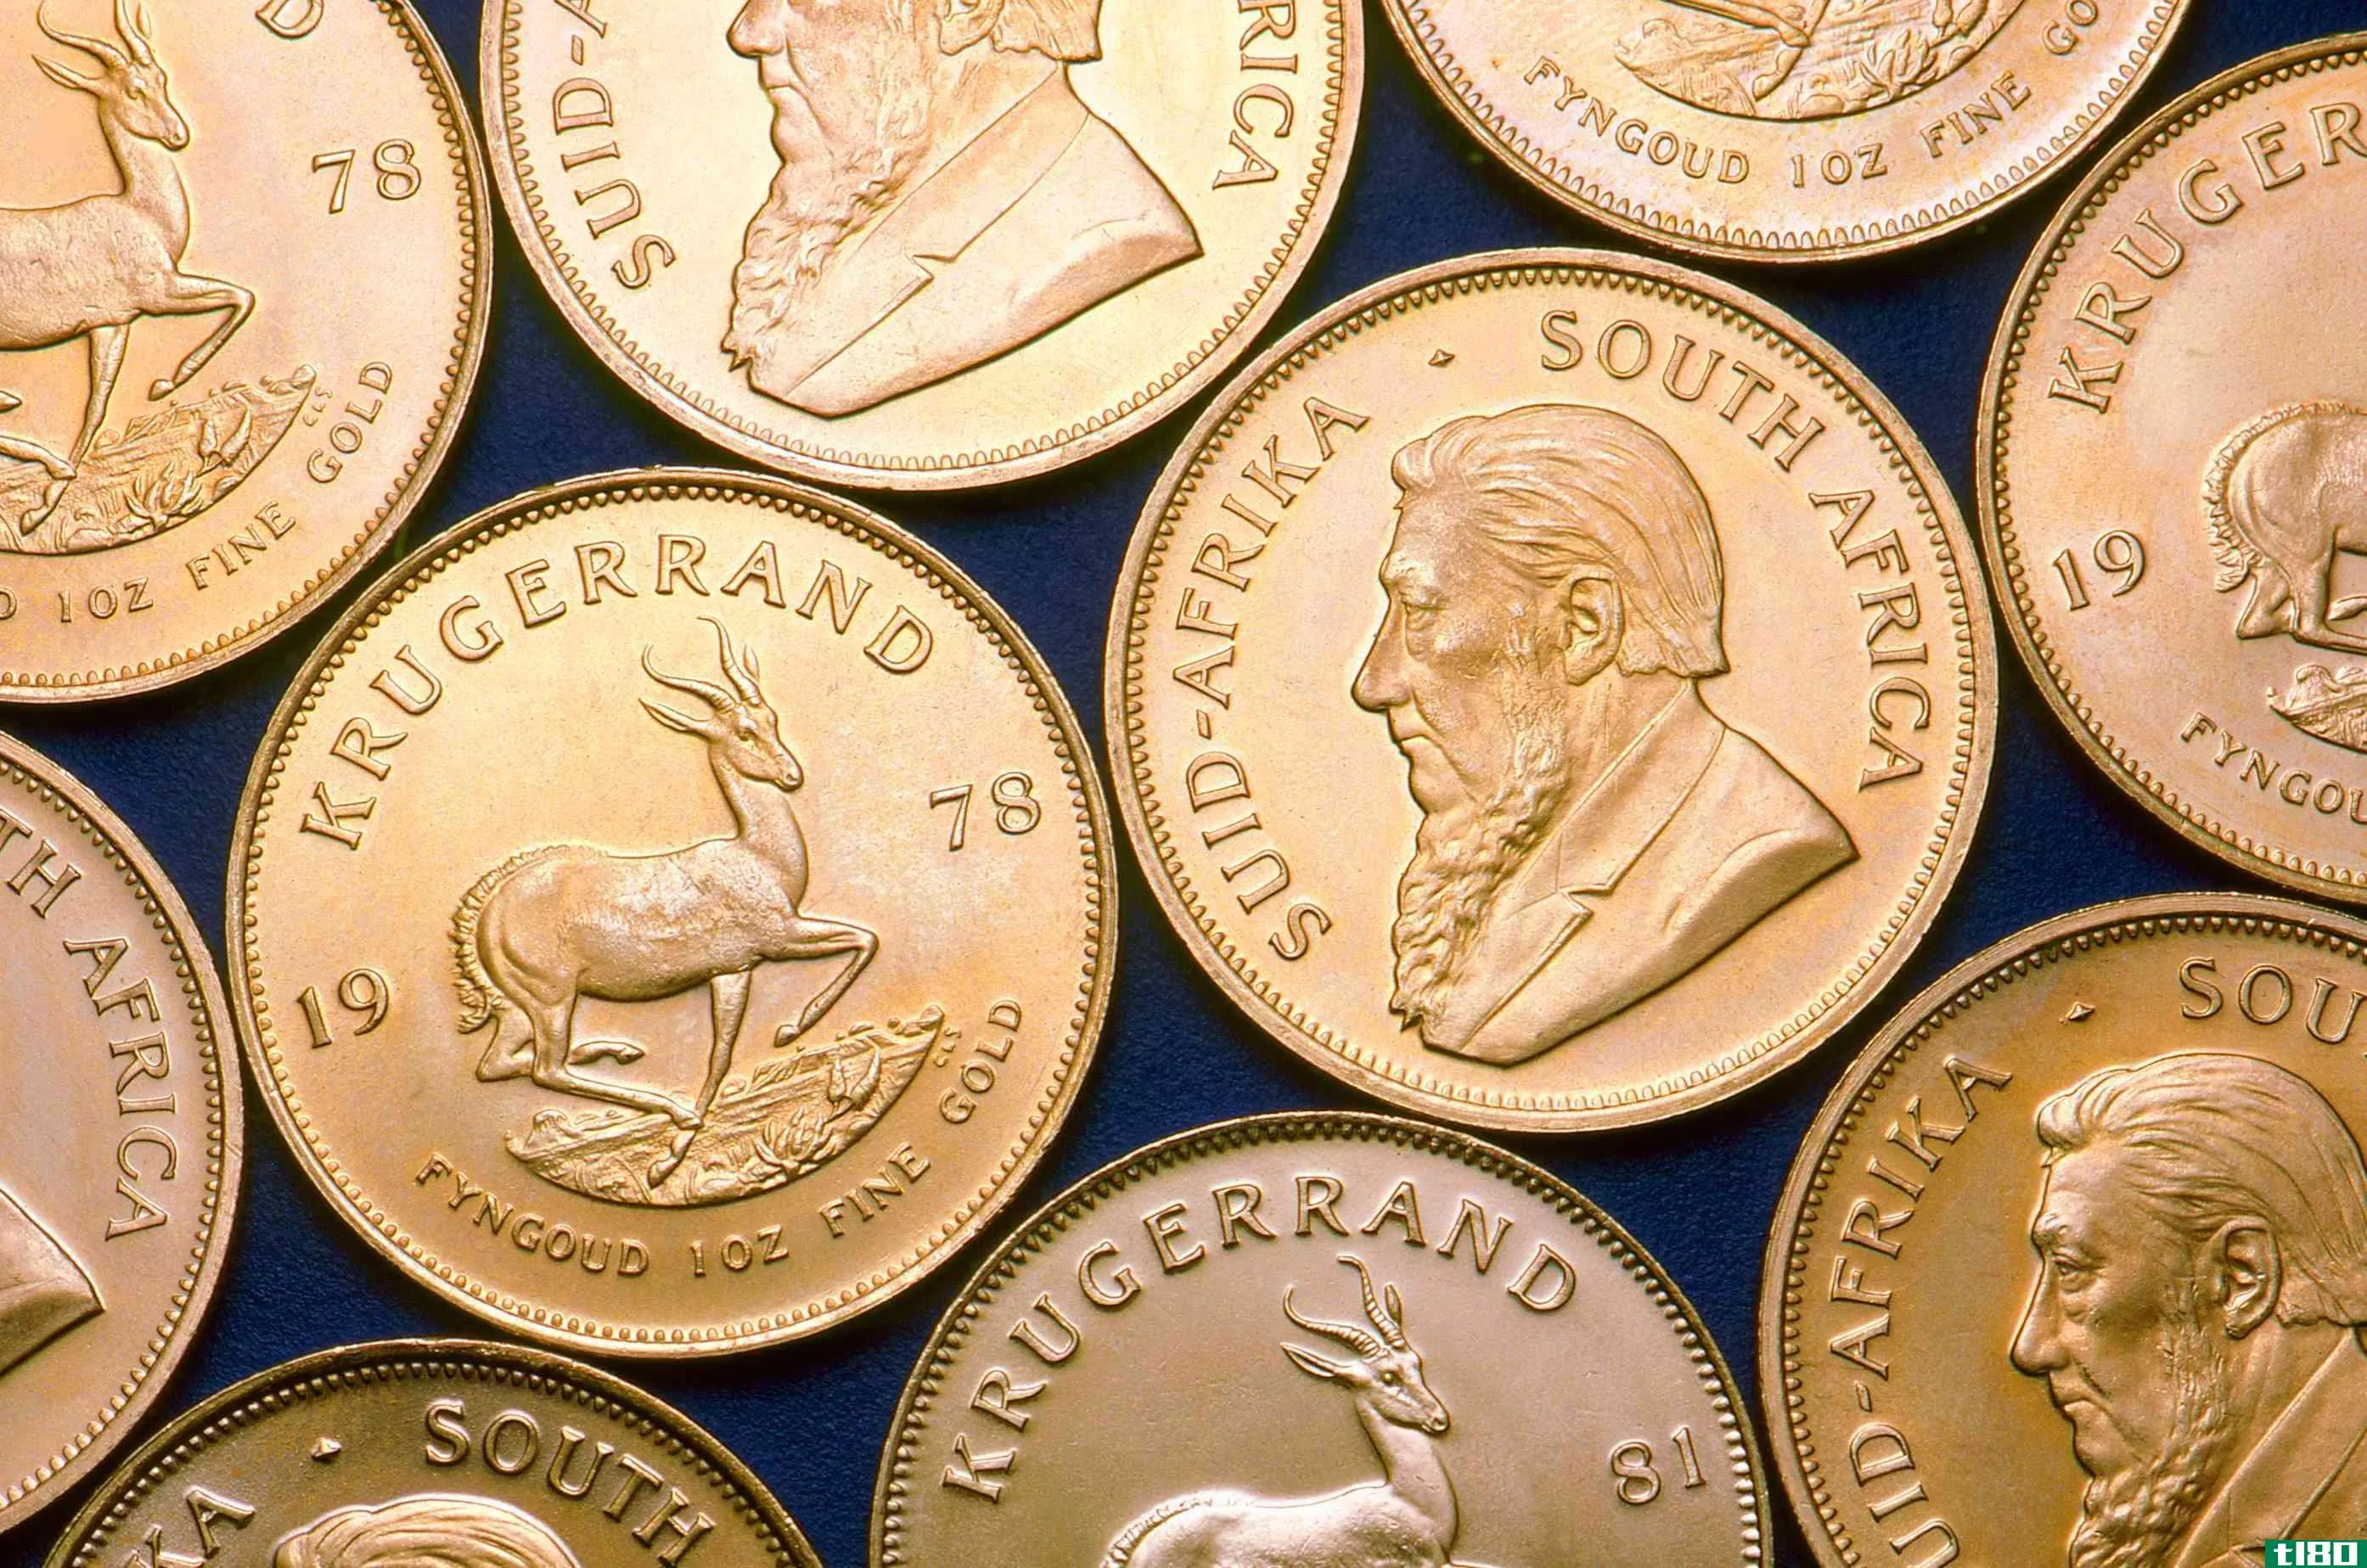 South African Krugerrand Gold Pieces